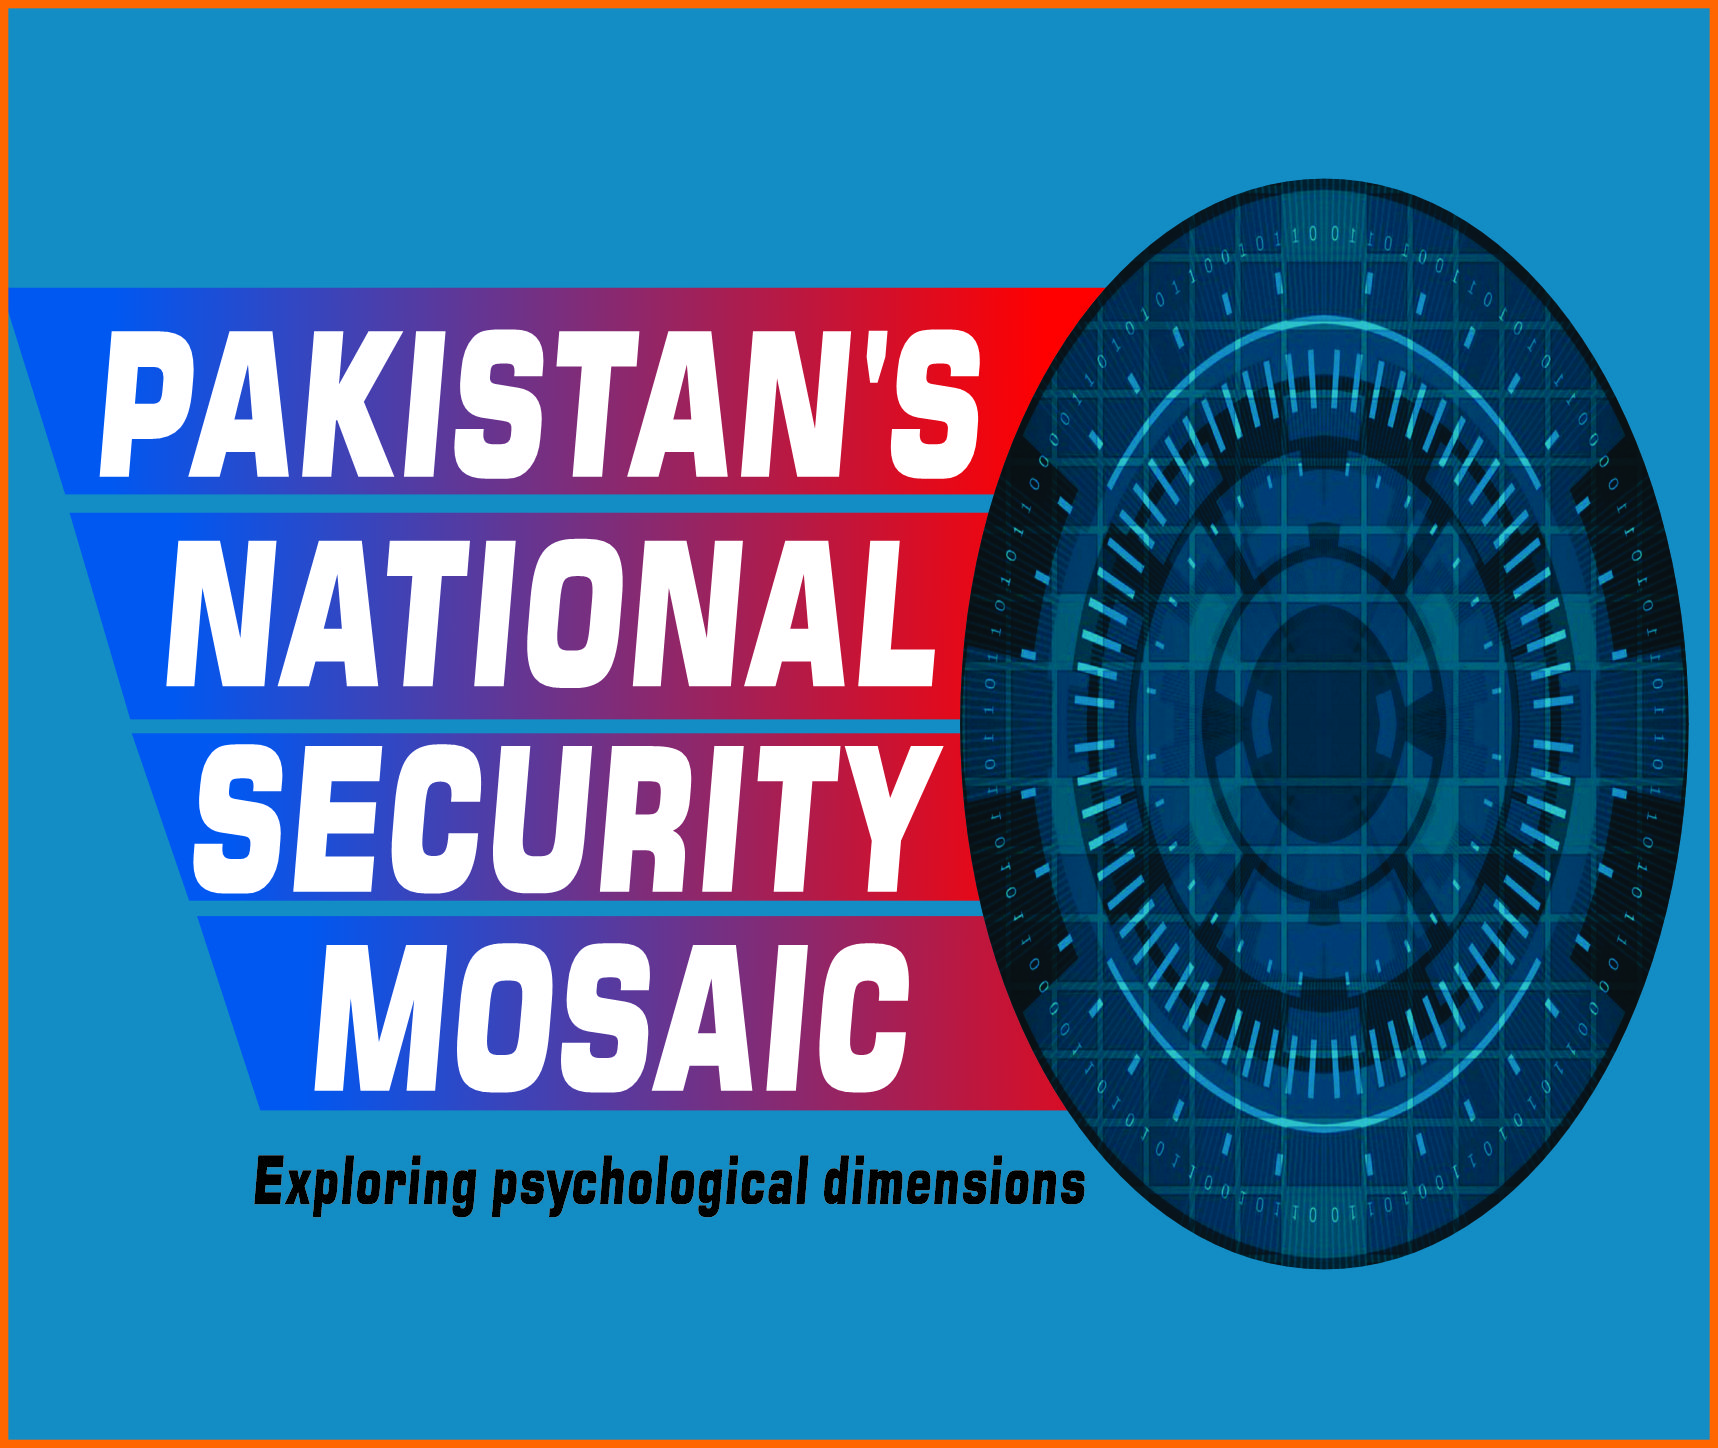 You are currently viewing Pakistan’s National Security Mosaic